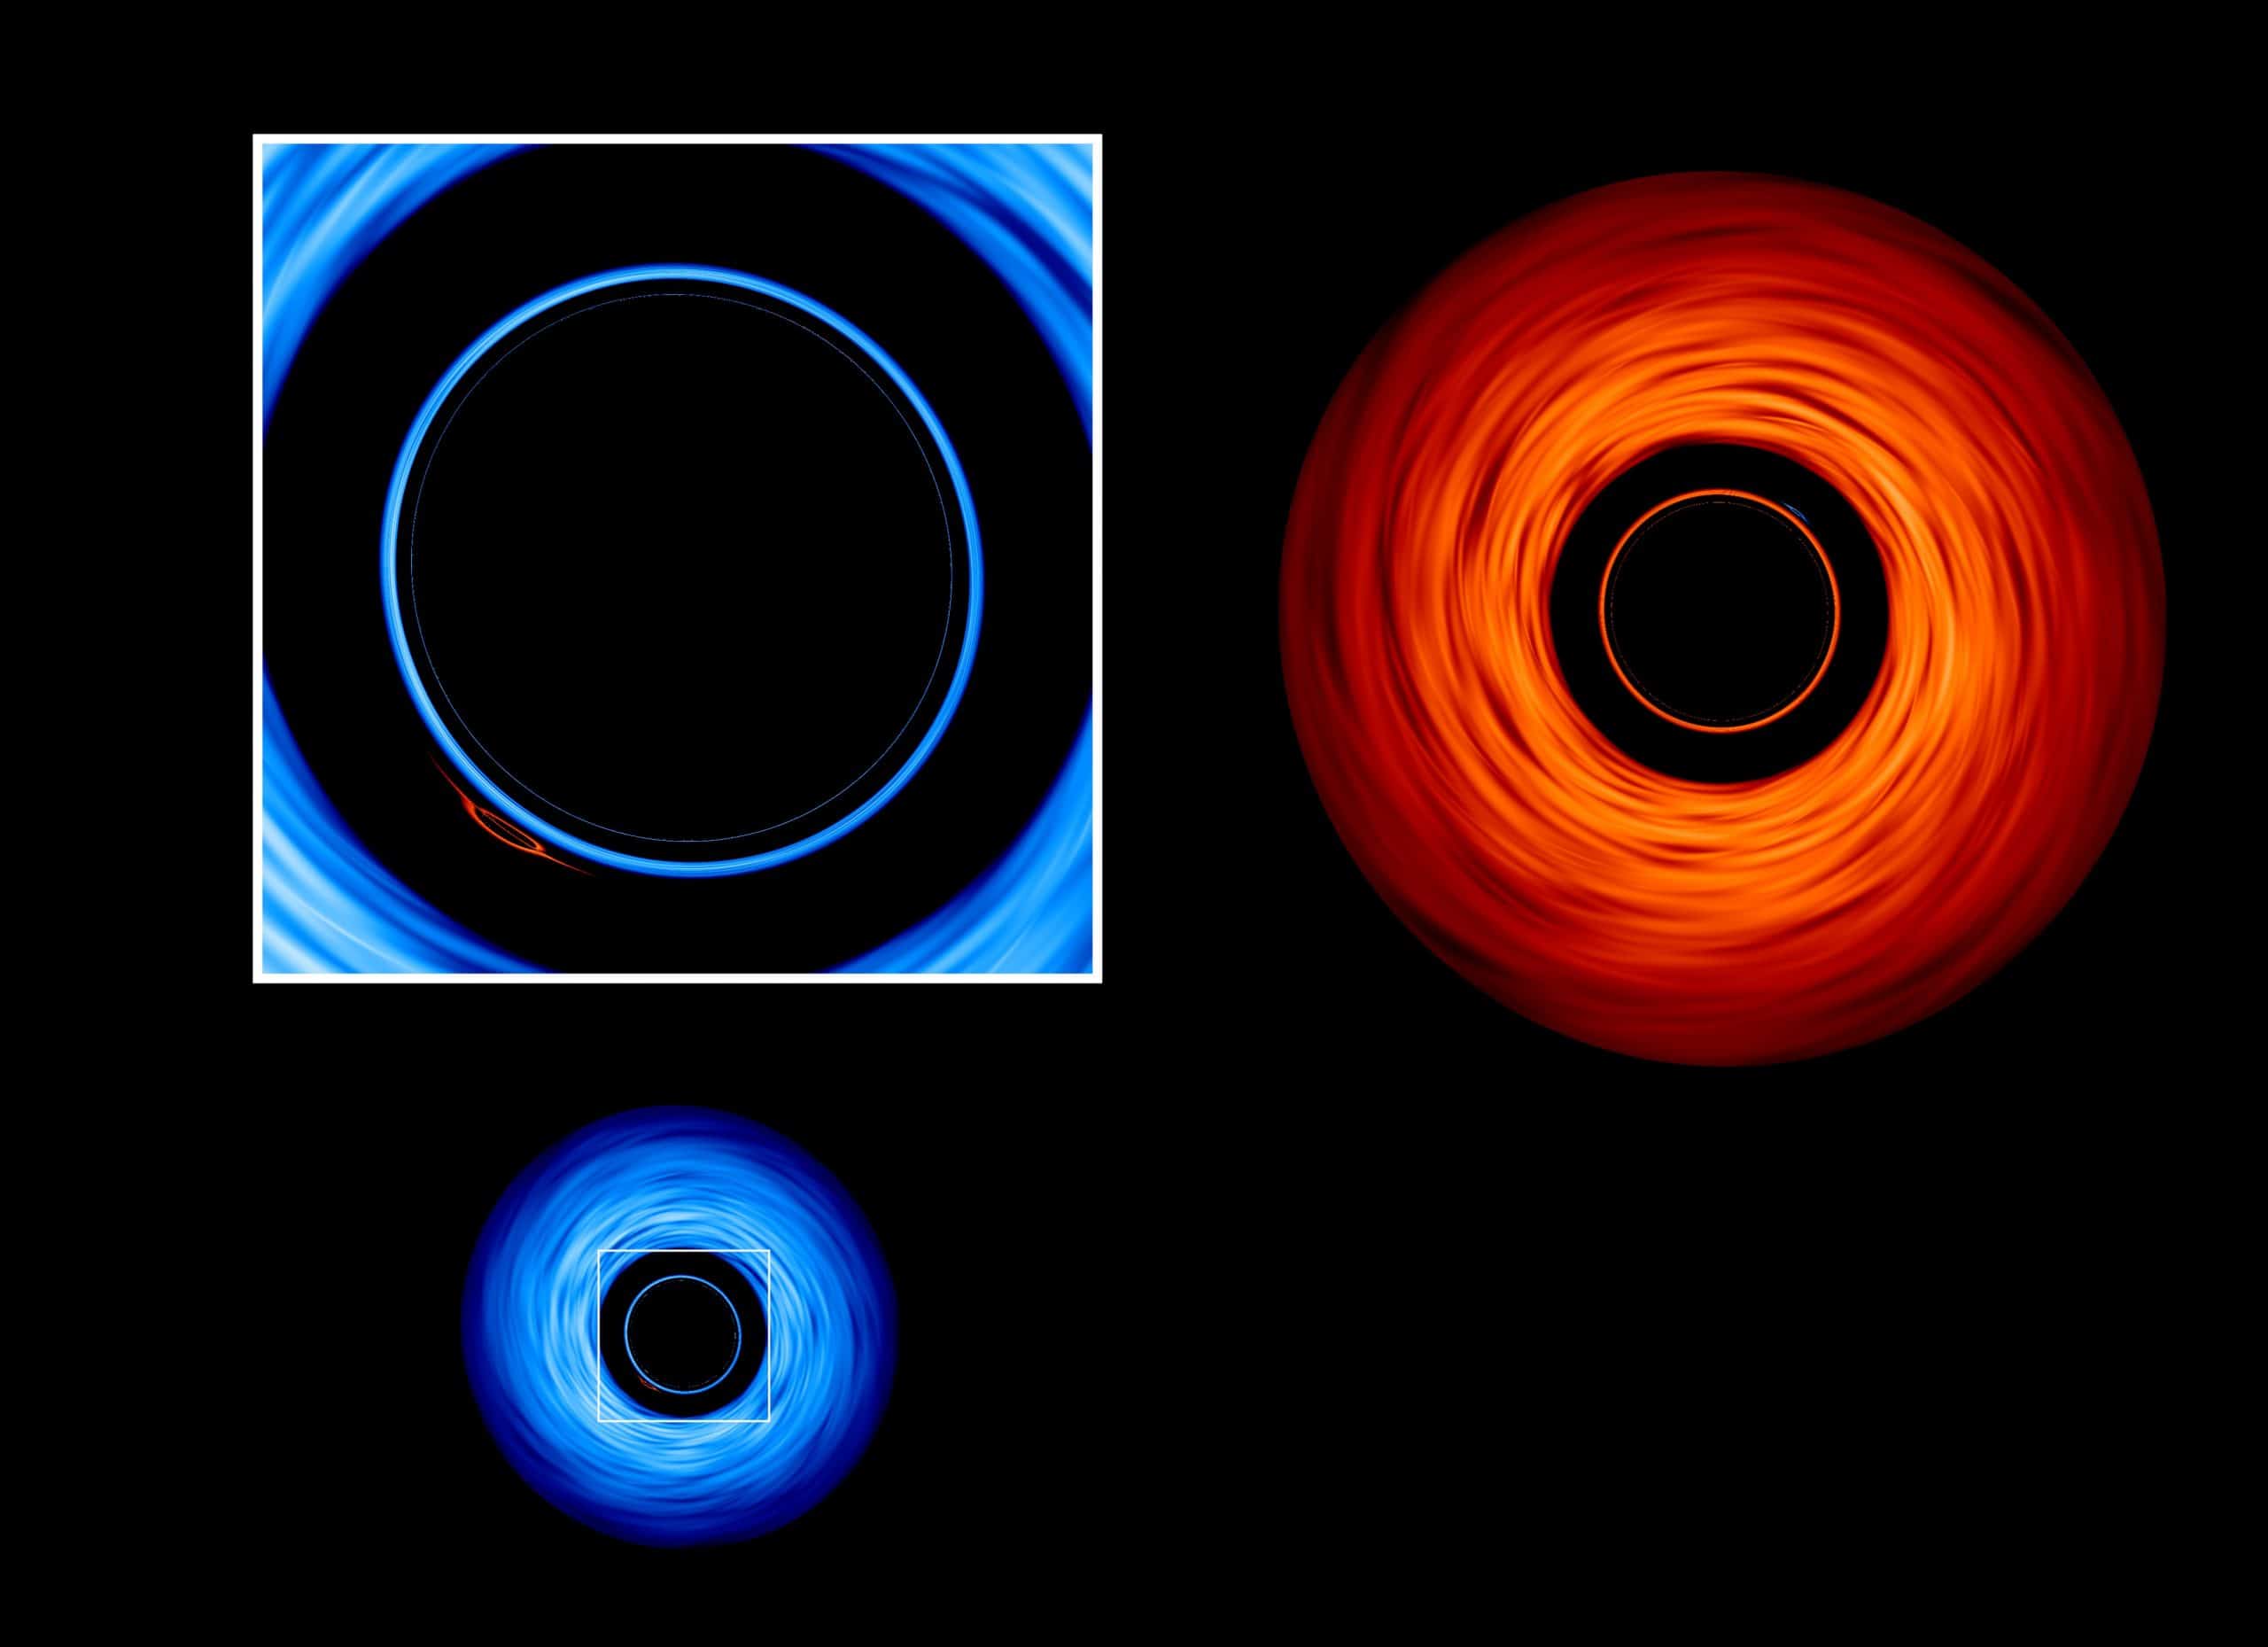 Black hole binary simulation face on view. Credit: NASA’s Goddard Space Flight Center/Jeremy Schnittman and Brian P. Powell